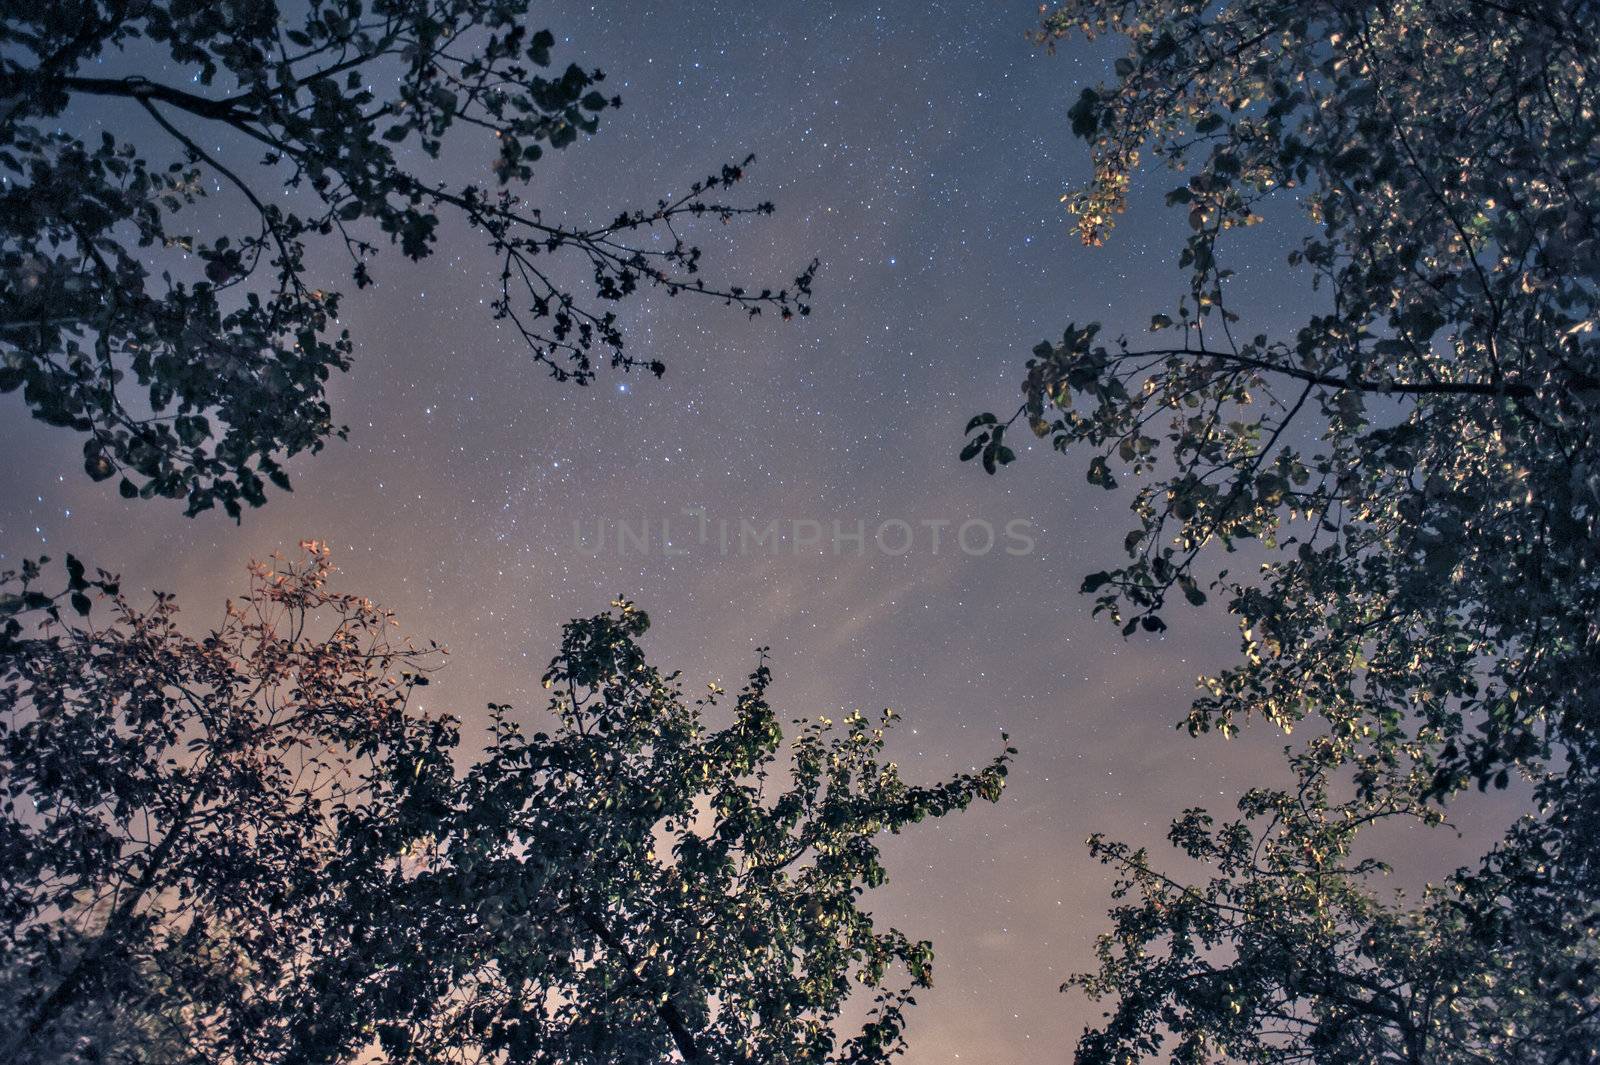 Night star sky with tree branches silhouette